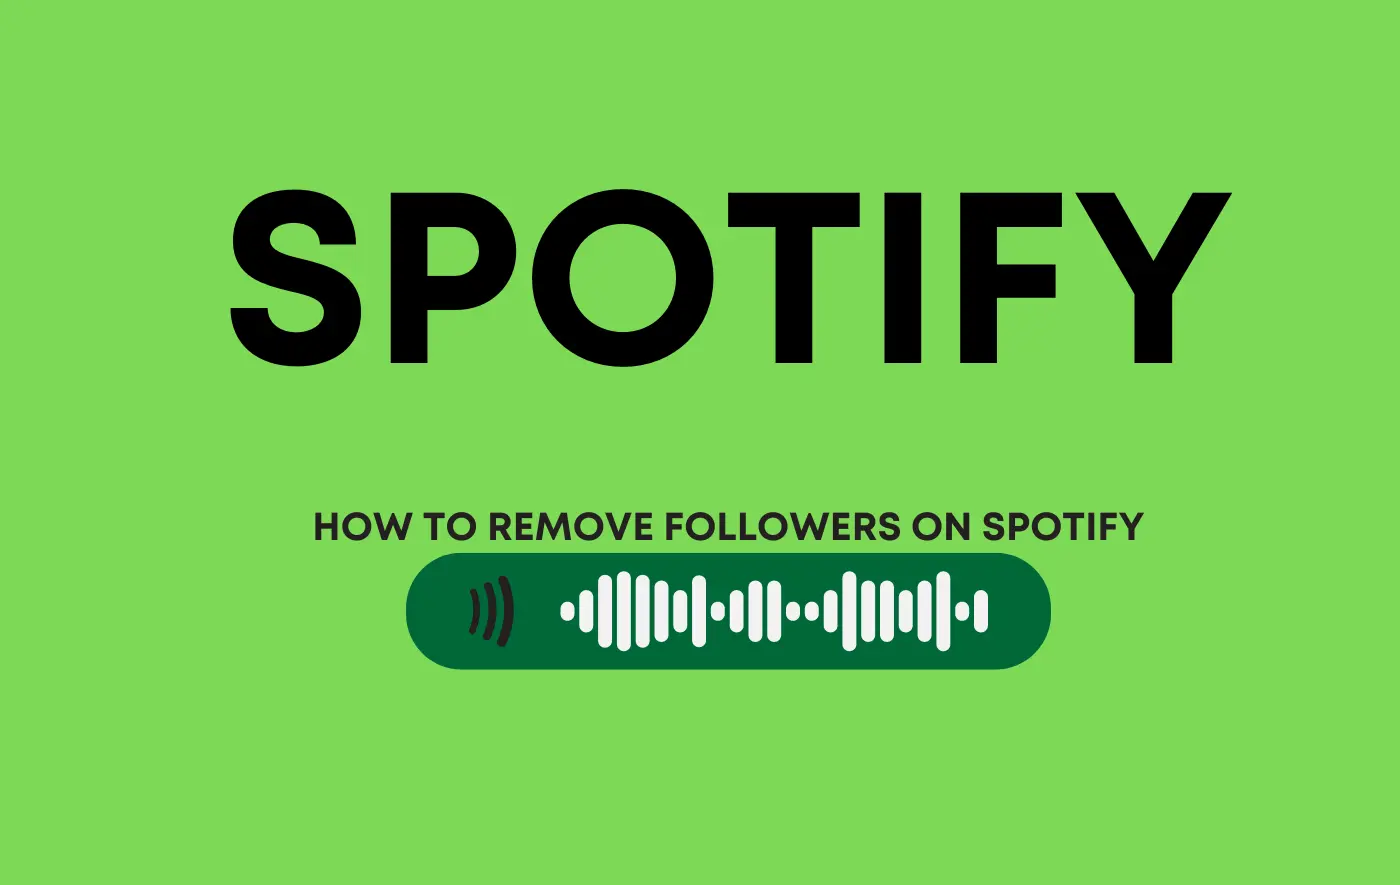 How to Remove Followers on Spotify? remove followers on Spotify mobile